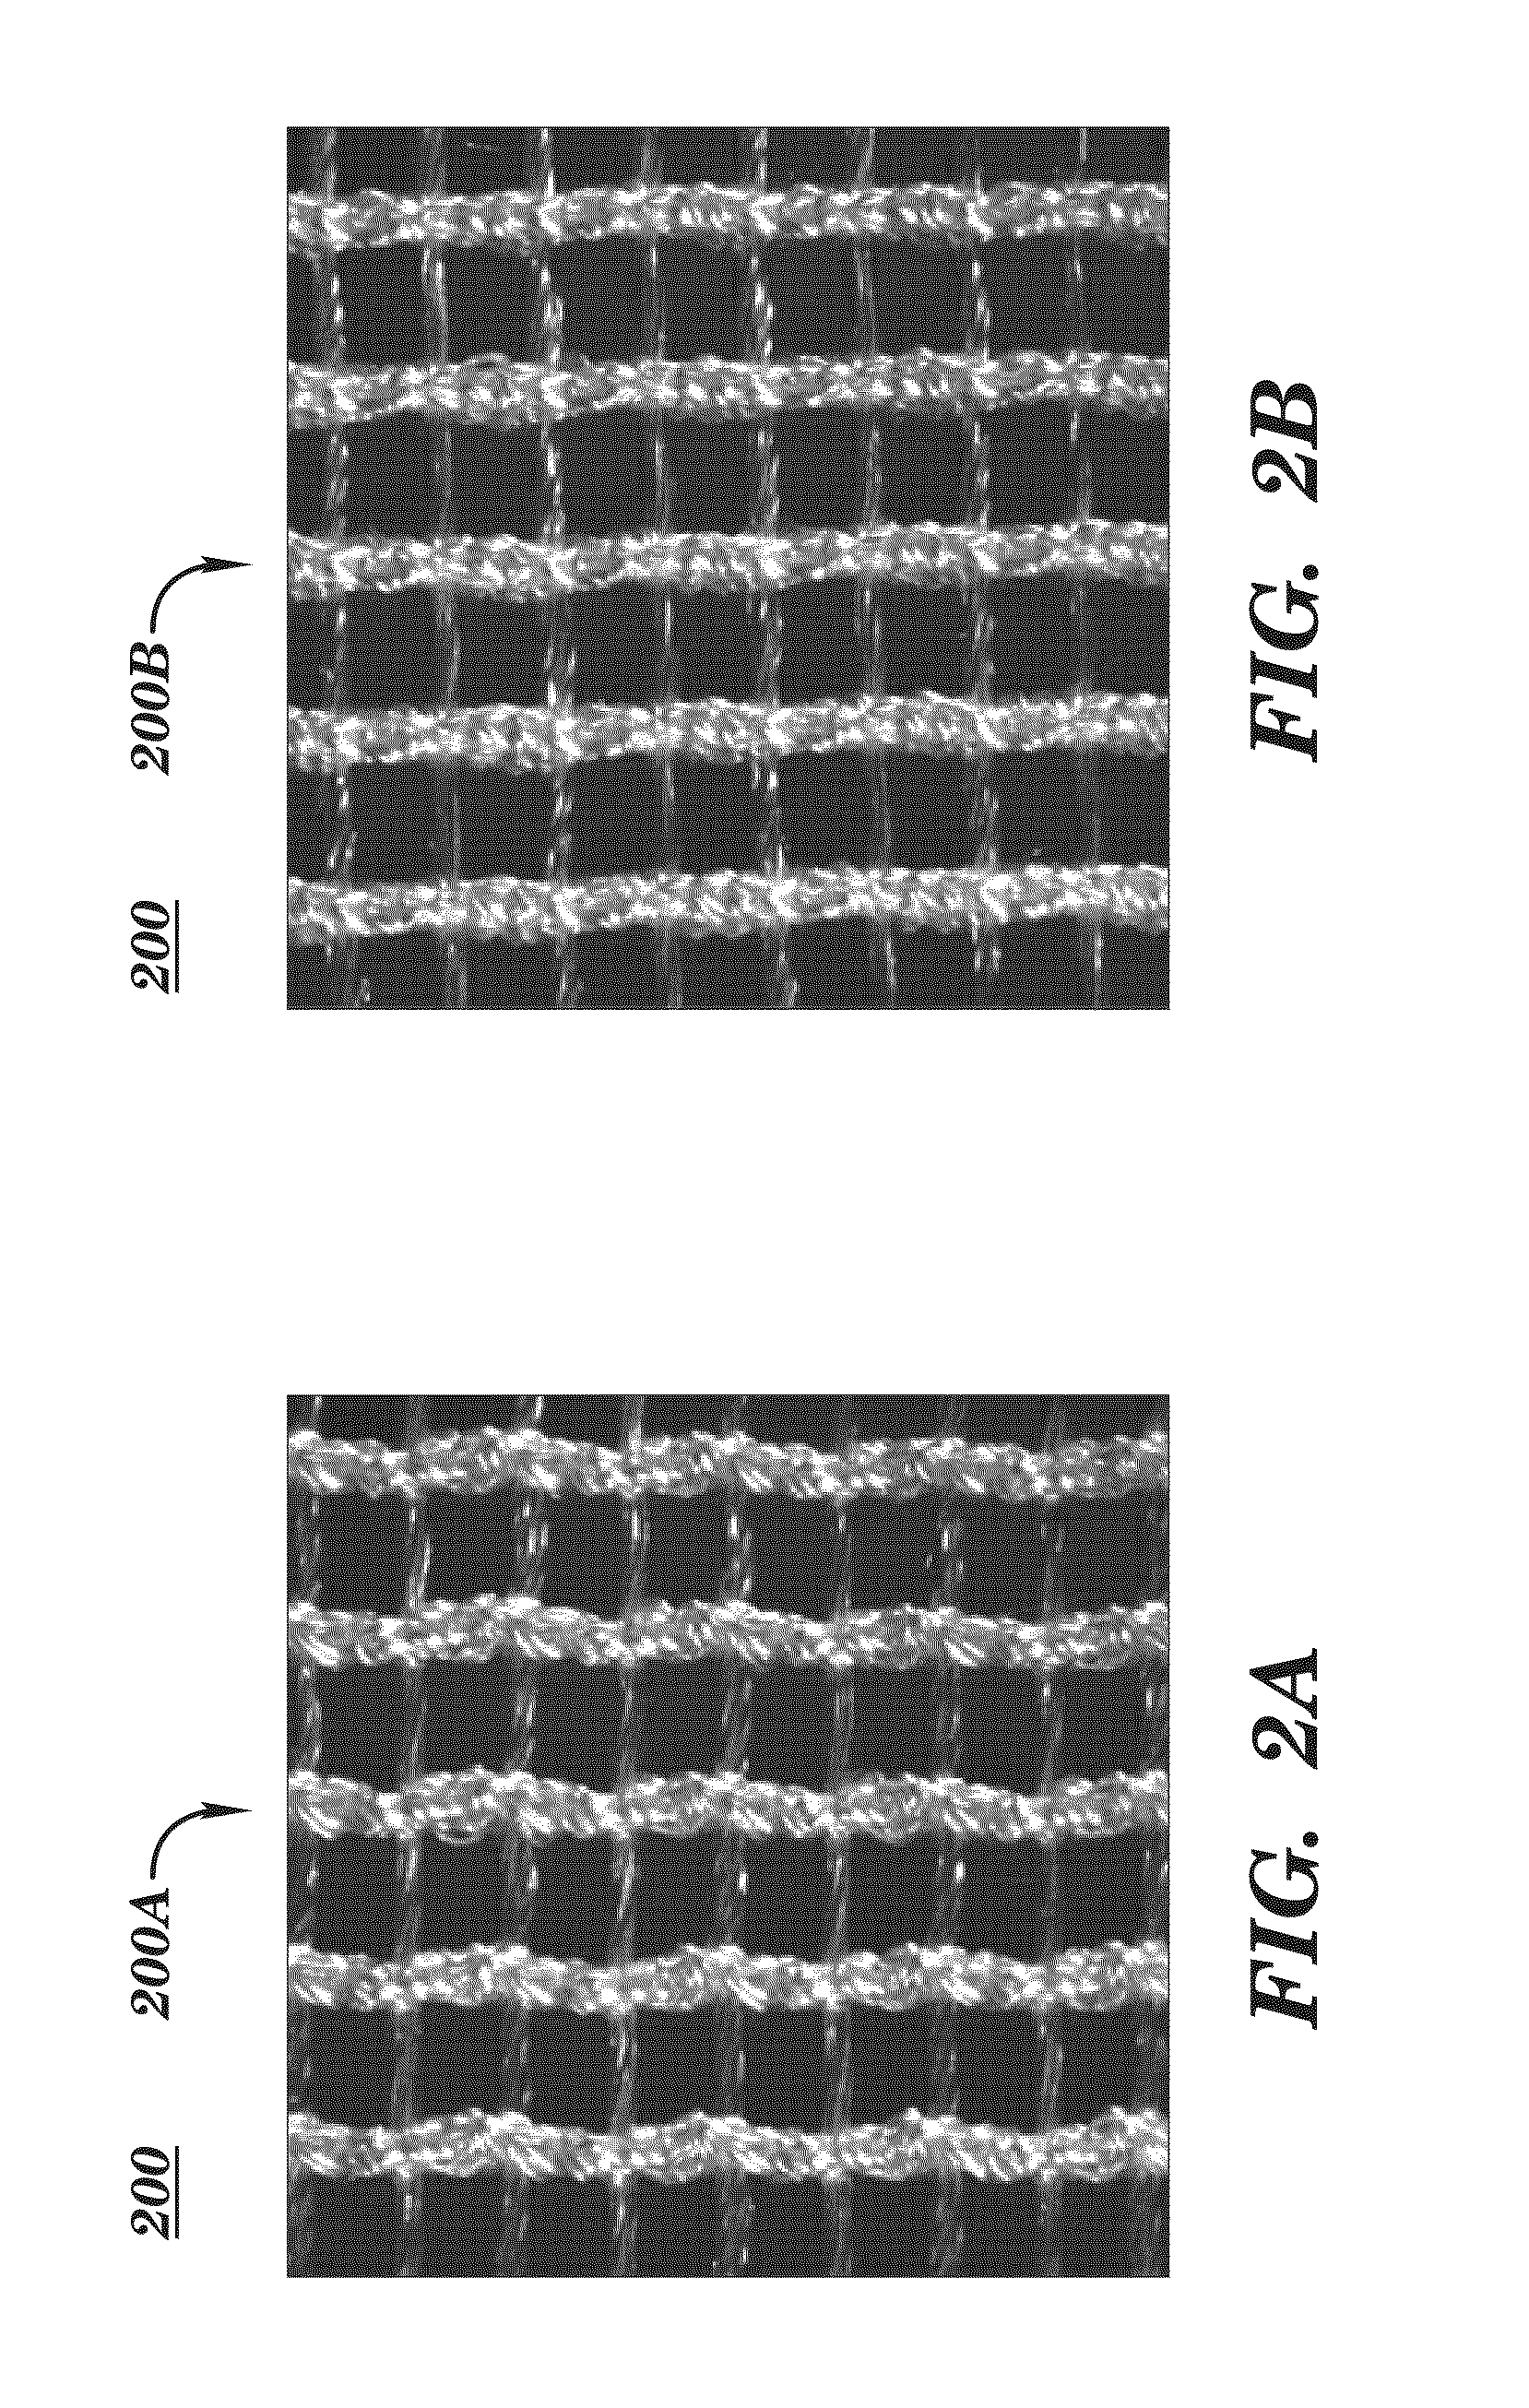 Prosthetic device and method of using in breast augmentation and/or breast reconstruction